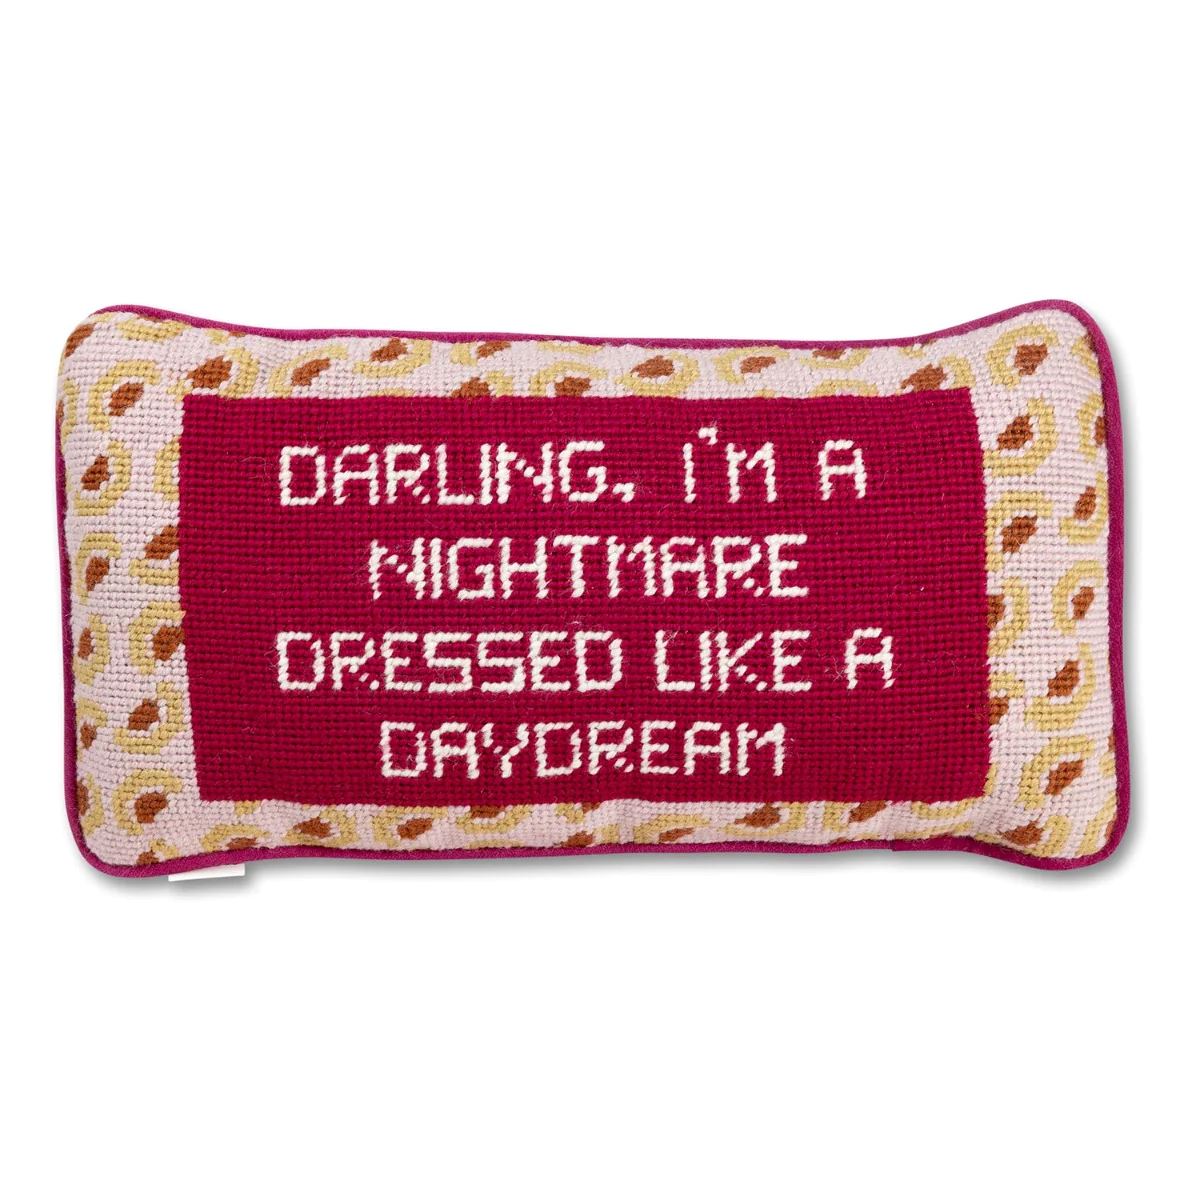 Dressed Like A Daydream Needlepoint Pillow Pillows Furbish Red 